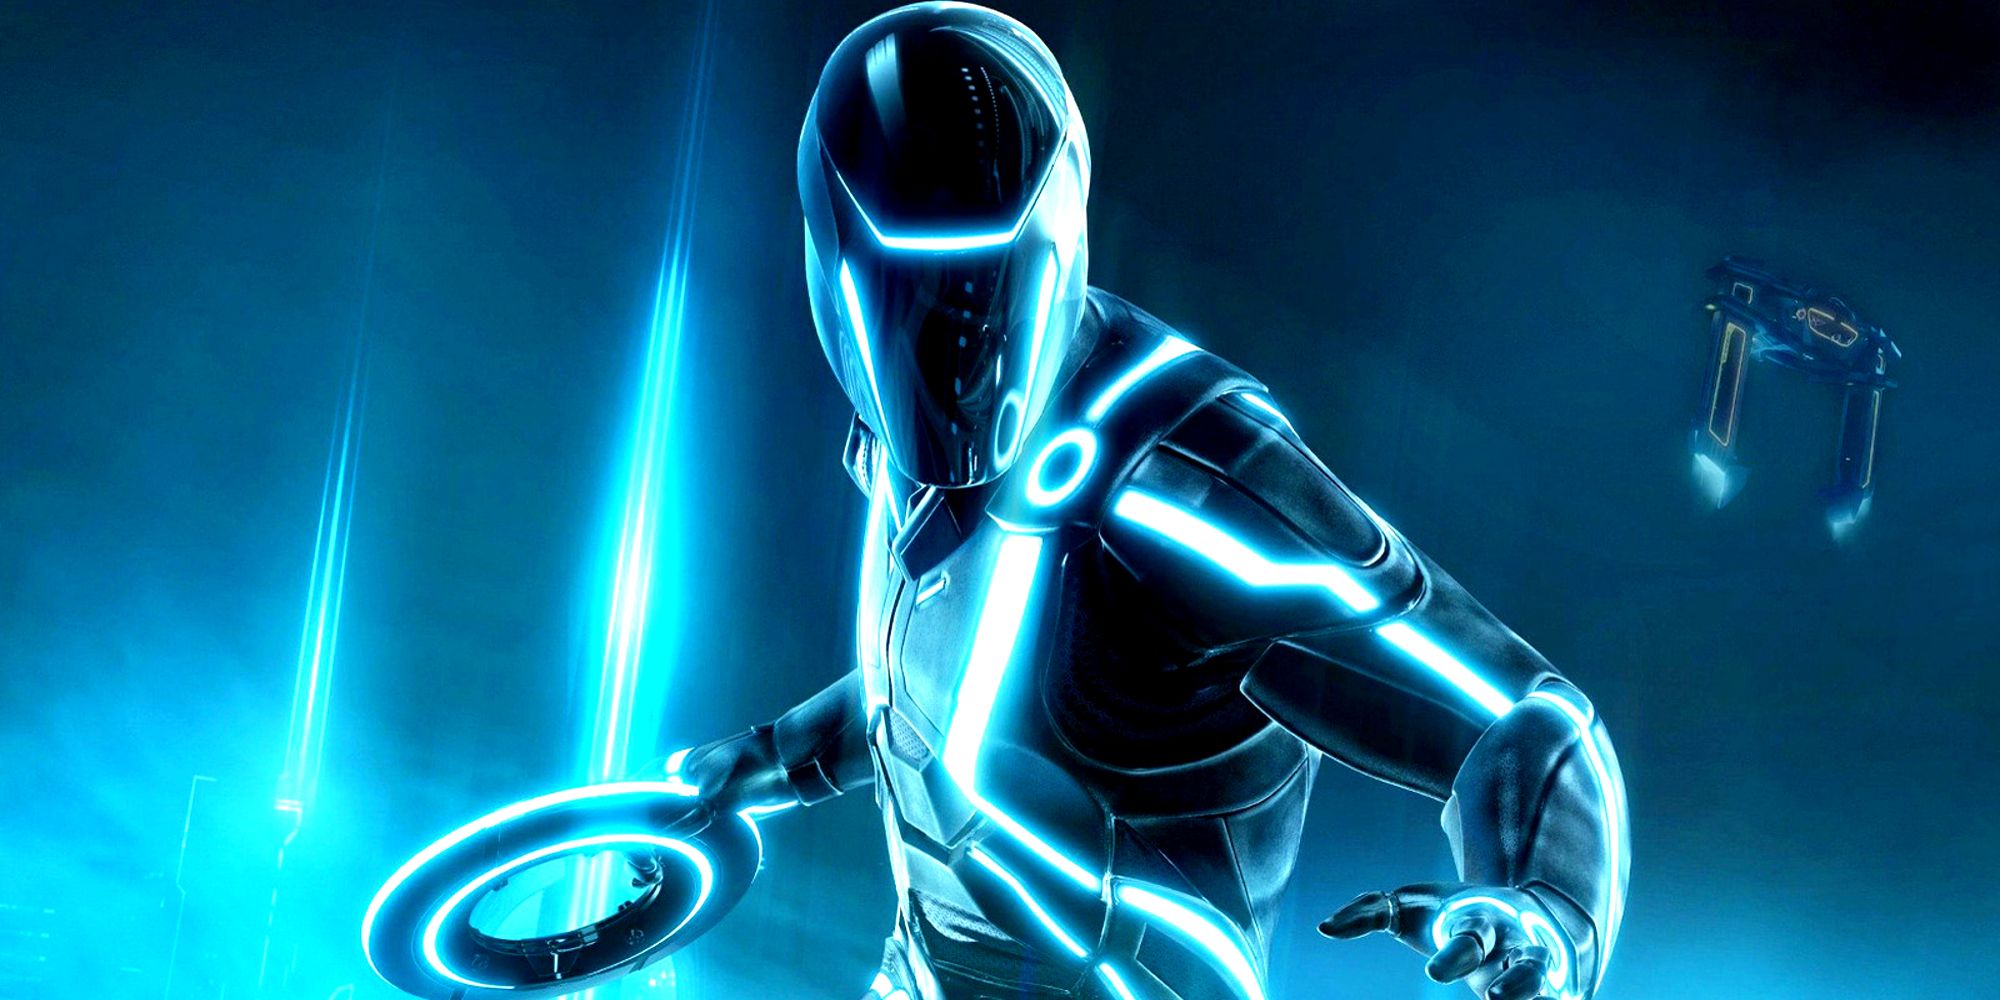 User in The Grid for Tron 3